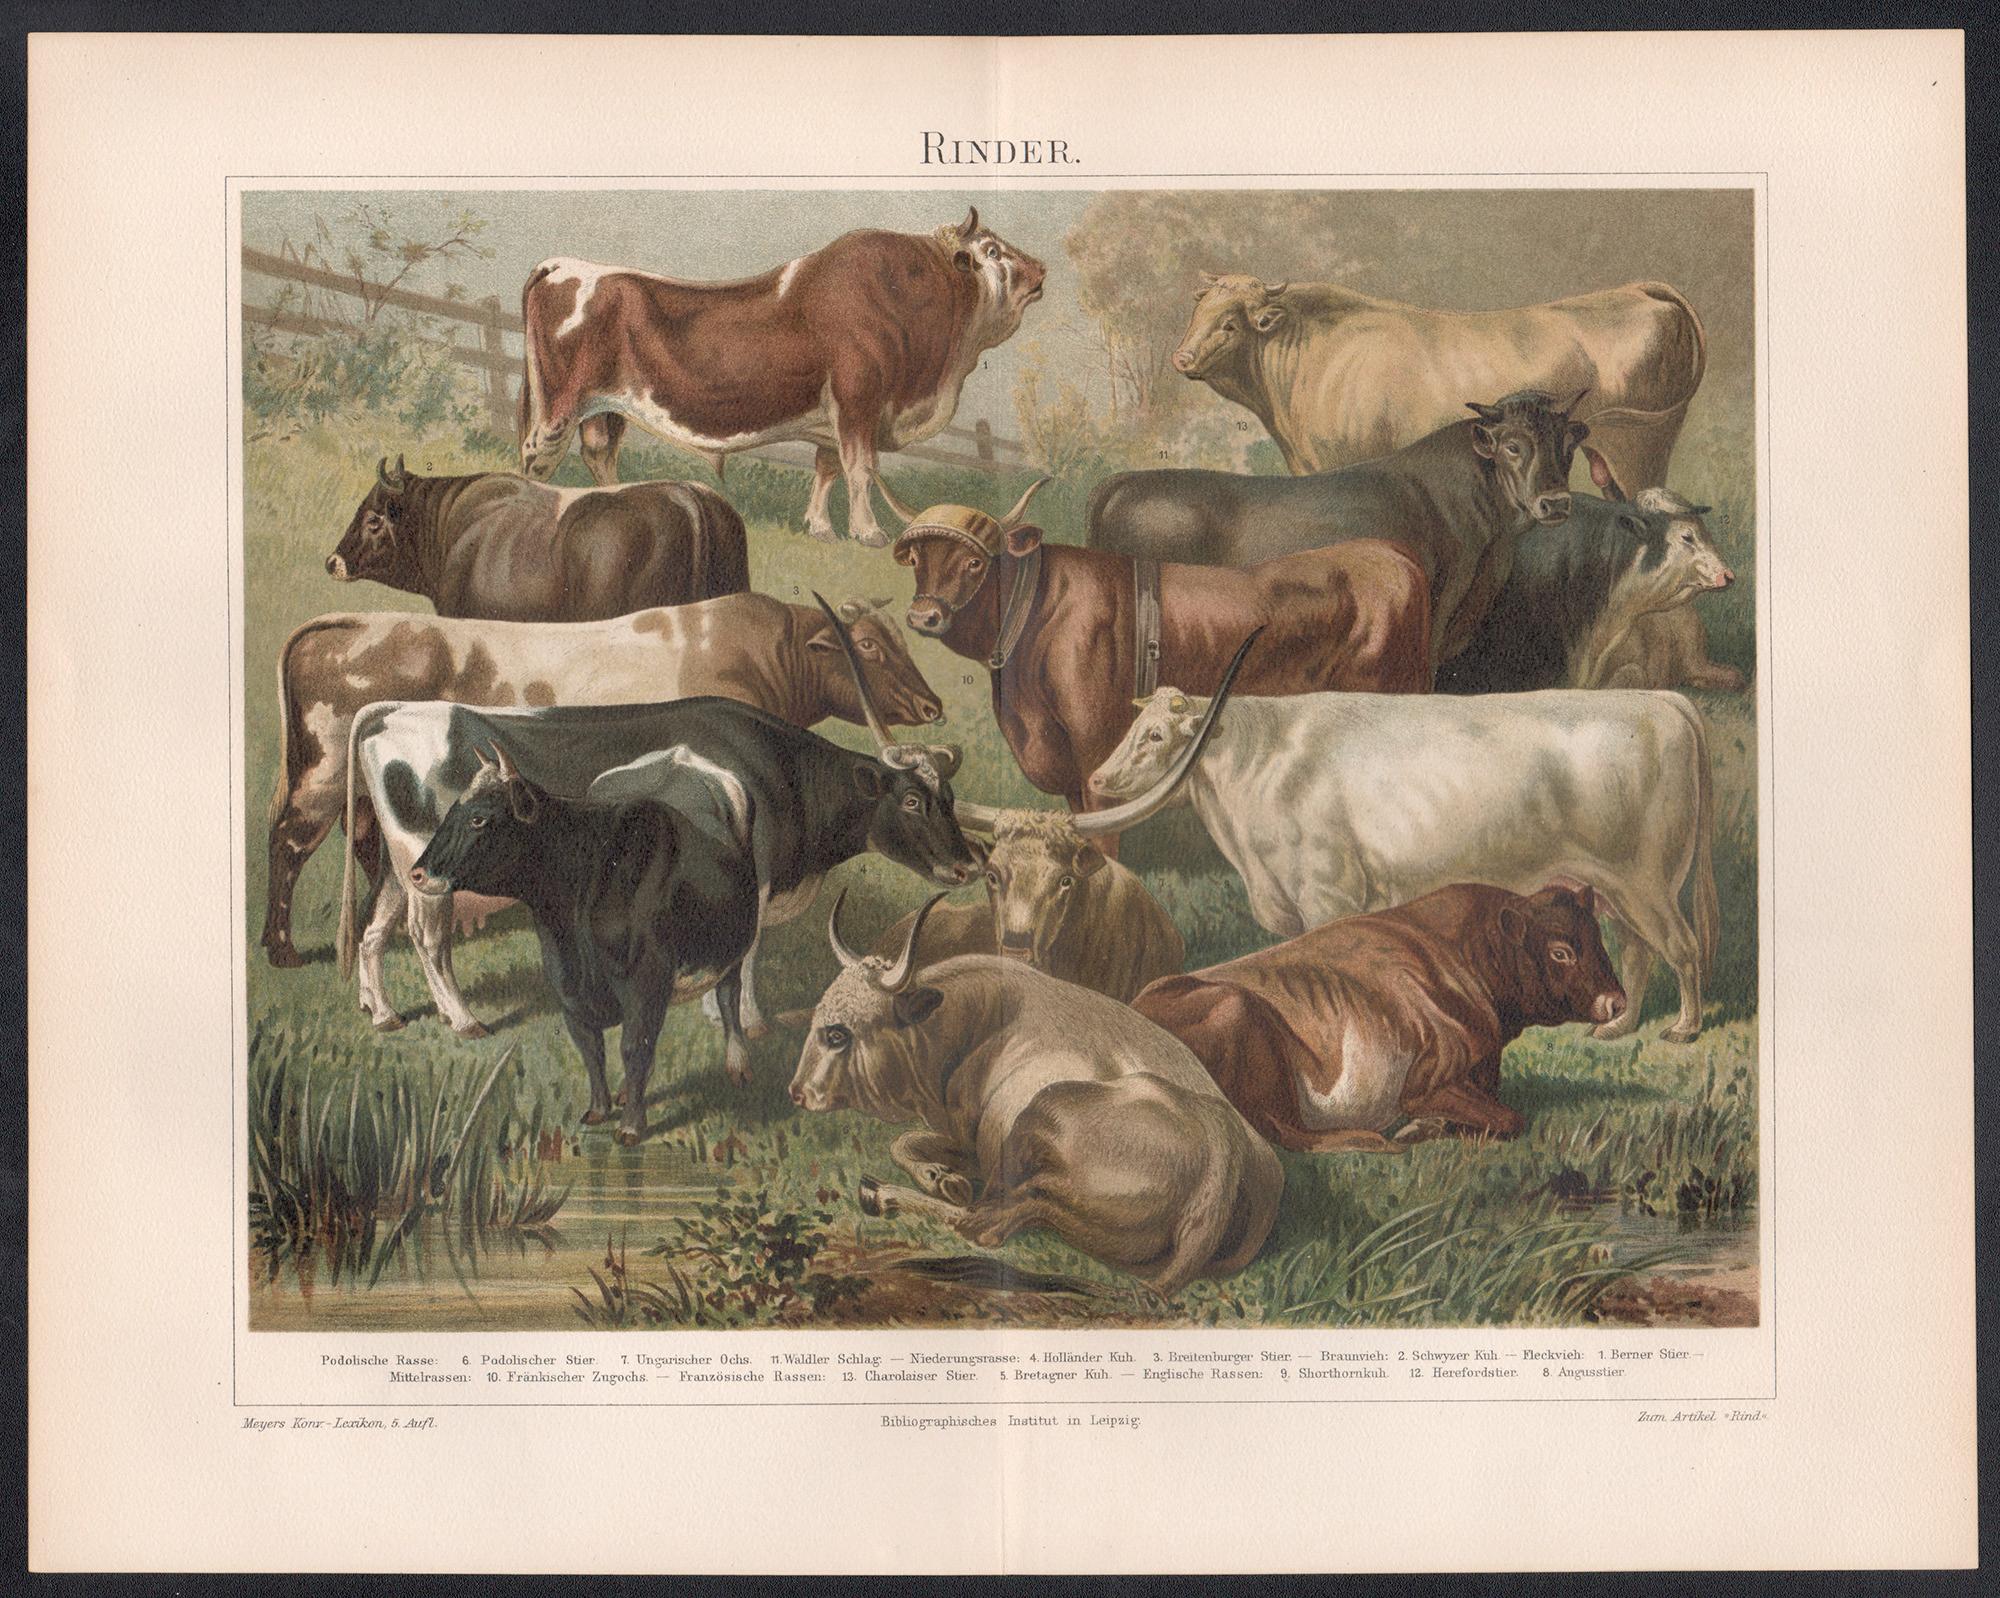 Rinder (Cattle Breeds), German antique animal farming livestock chromolithograph - Print by Unknown